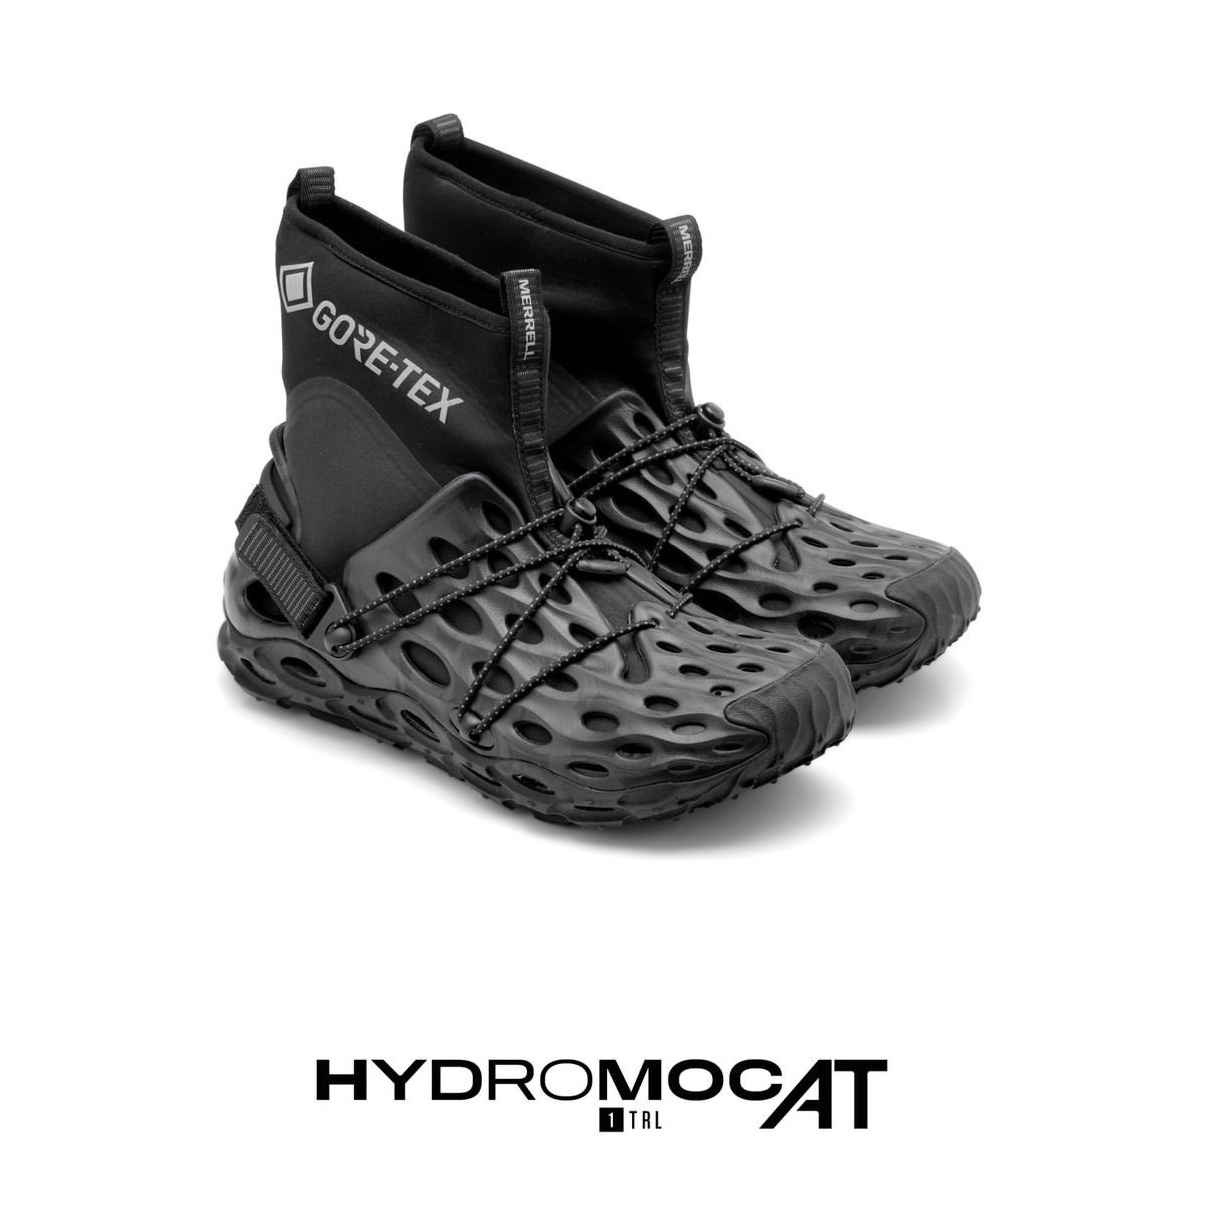 Merrell 1TRL Hydro Moc AT - Soldier Systems Daily